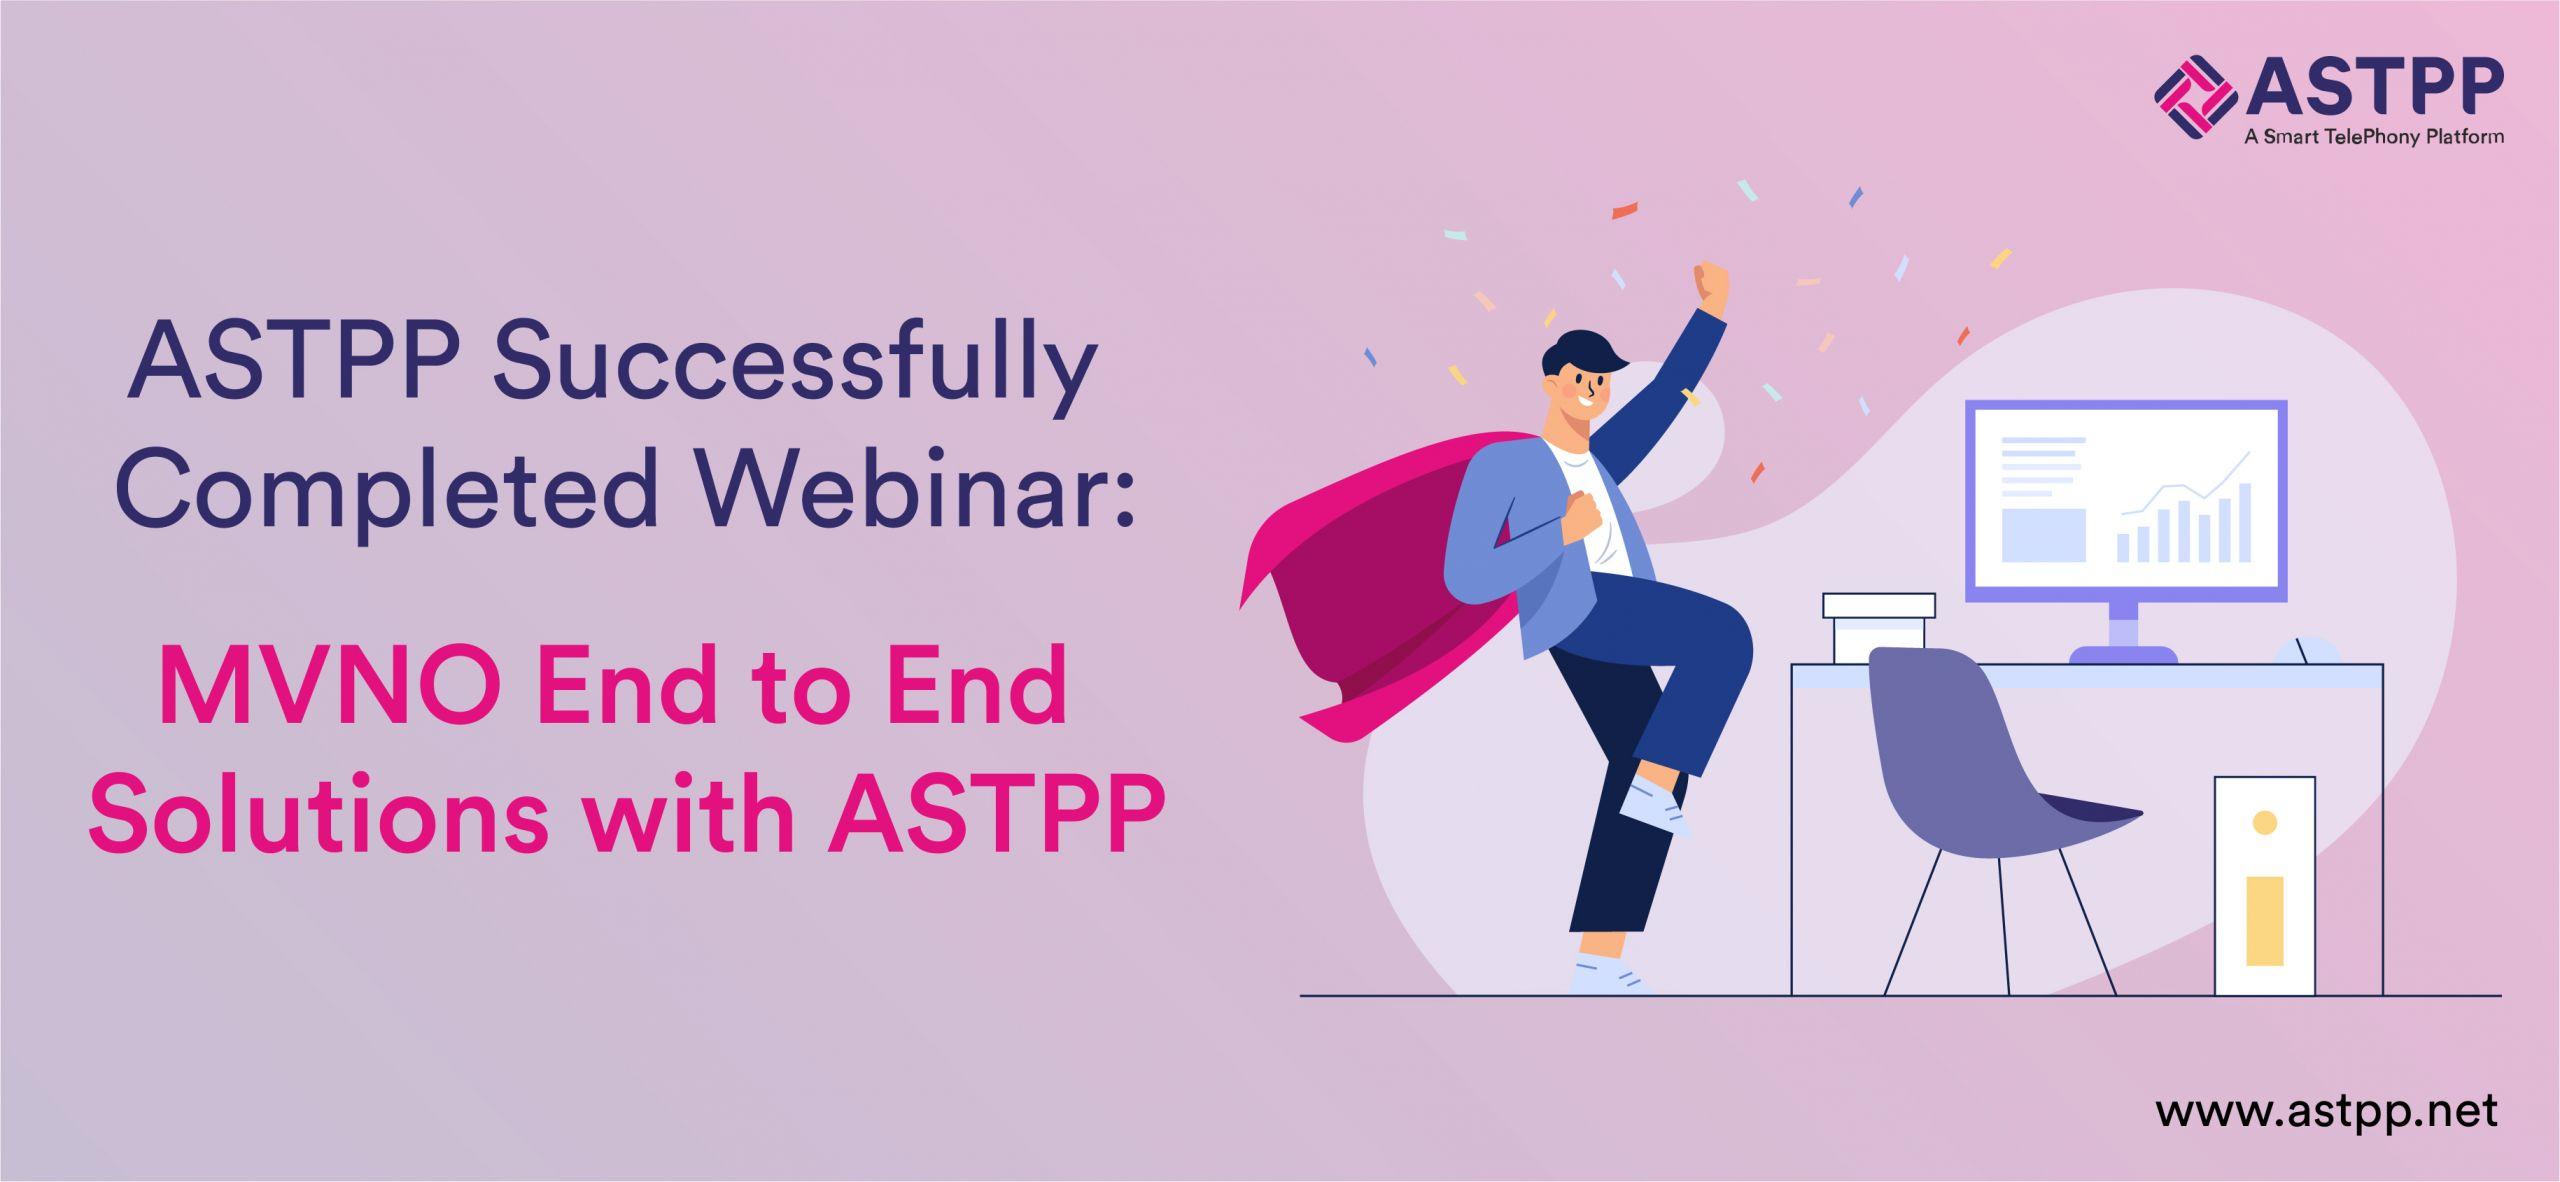 ASTPP Successfully Completed Webinar: MVNO End to End Solutions with ASTPP